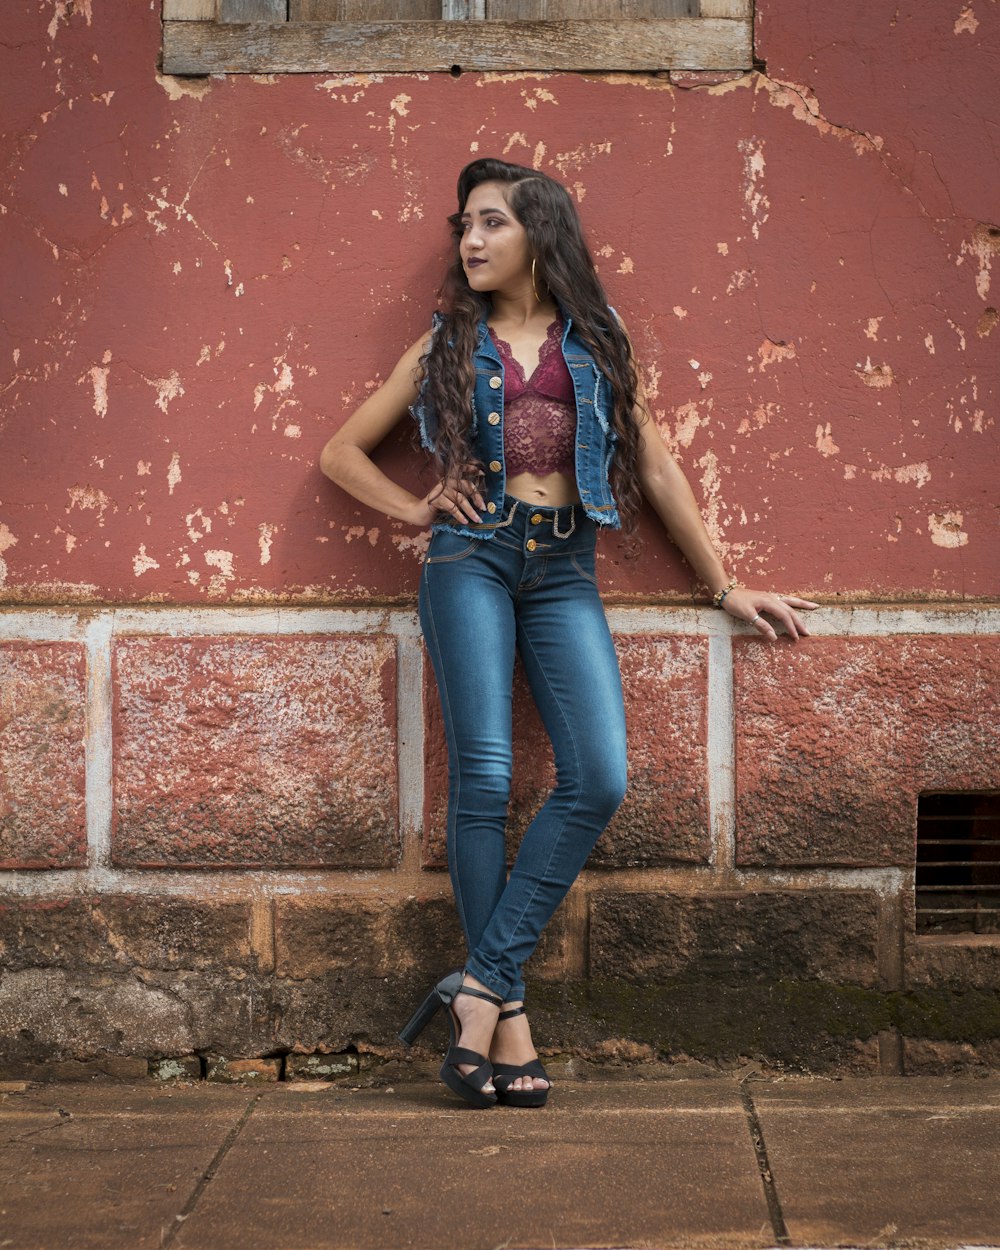 woman wearing blue denim jeans and maroon crop top leaning on wall photo –  Free Clothing Image on Unsplash